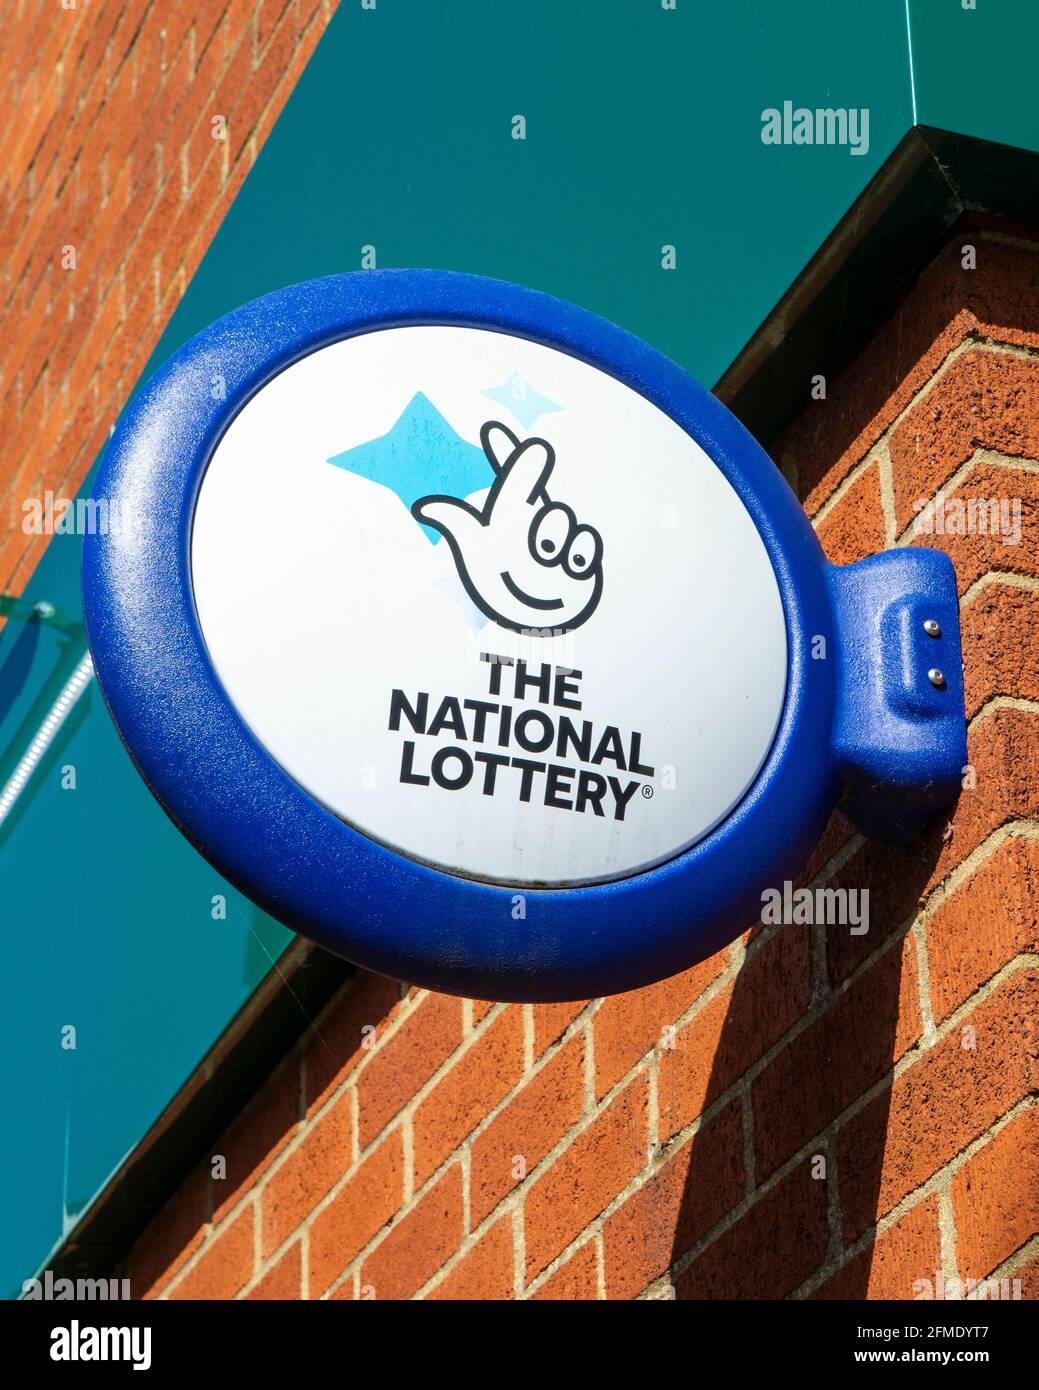 Hertfordhire, UK - April 22nd 2021: Close-up of The National Lottery symbol outside a newsagents shop in the United Kingdom. Stock Photo